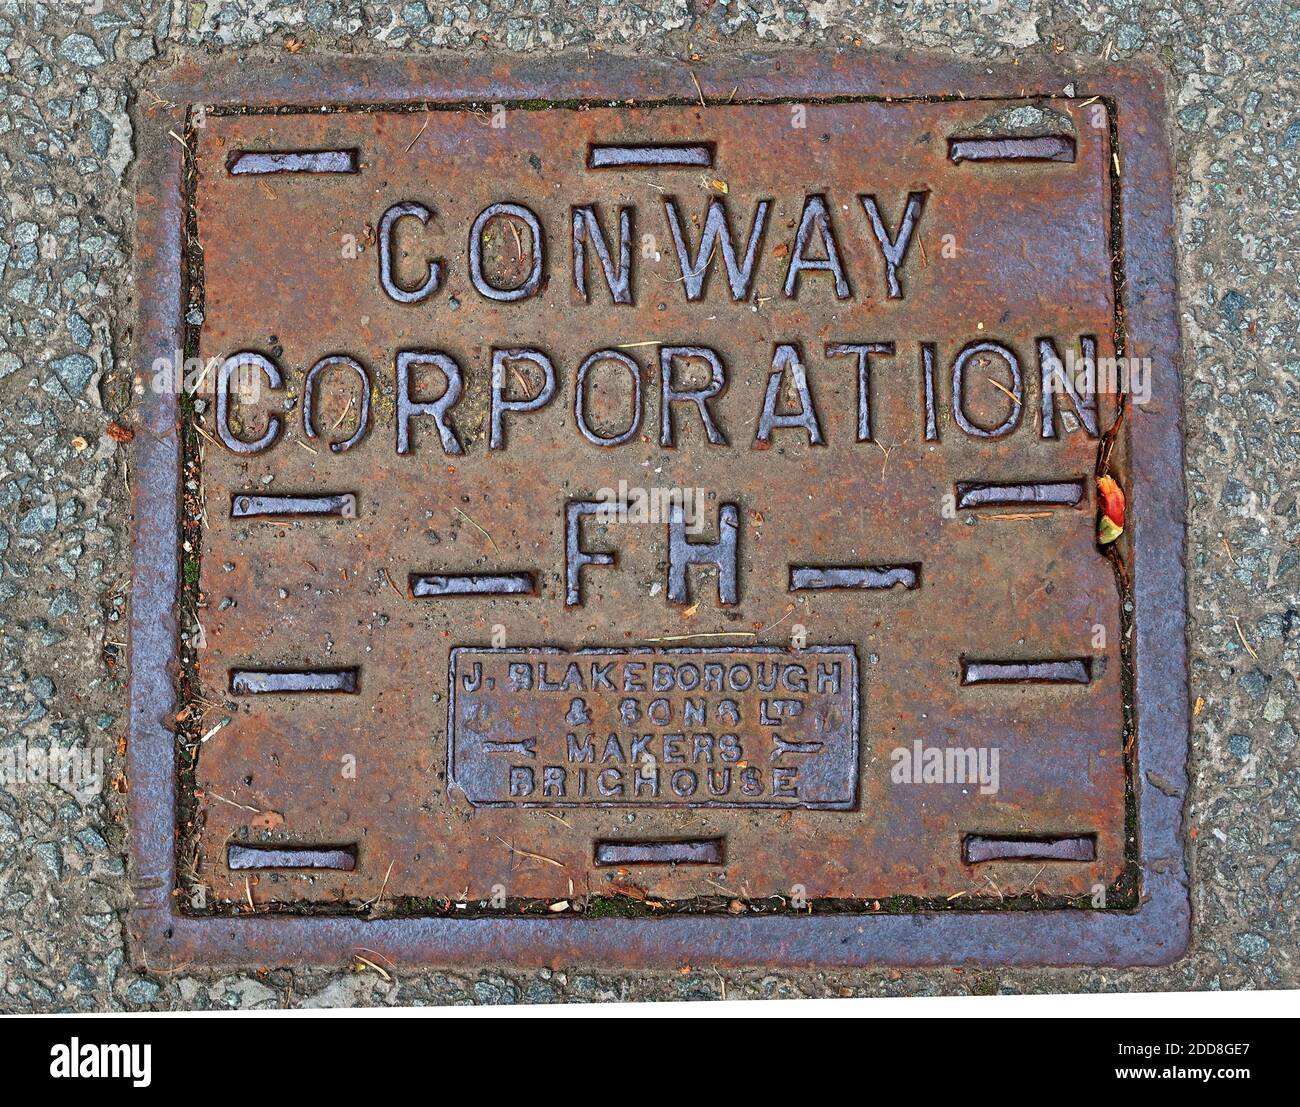 Conway Corporation FH,Conwy Corporation FH,Fire Hydrant cover,ironwork,Blakeborough,makers Brighouse Stock Photo